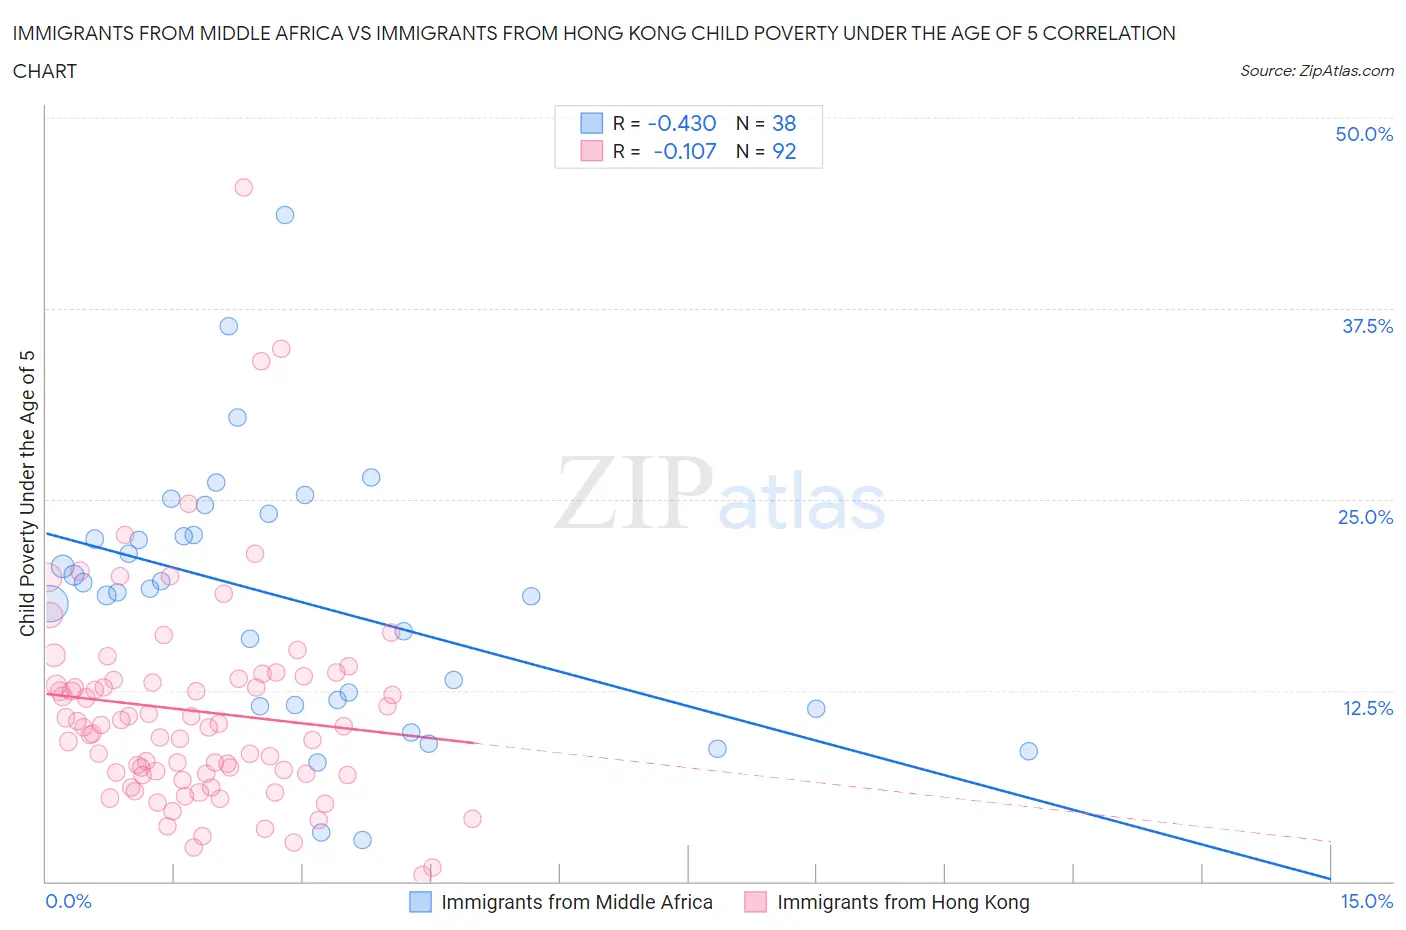 Immigrants from Middle Africa vs Immigrants from Hong Kong Child Poverty Under the Age of 5